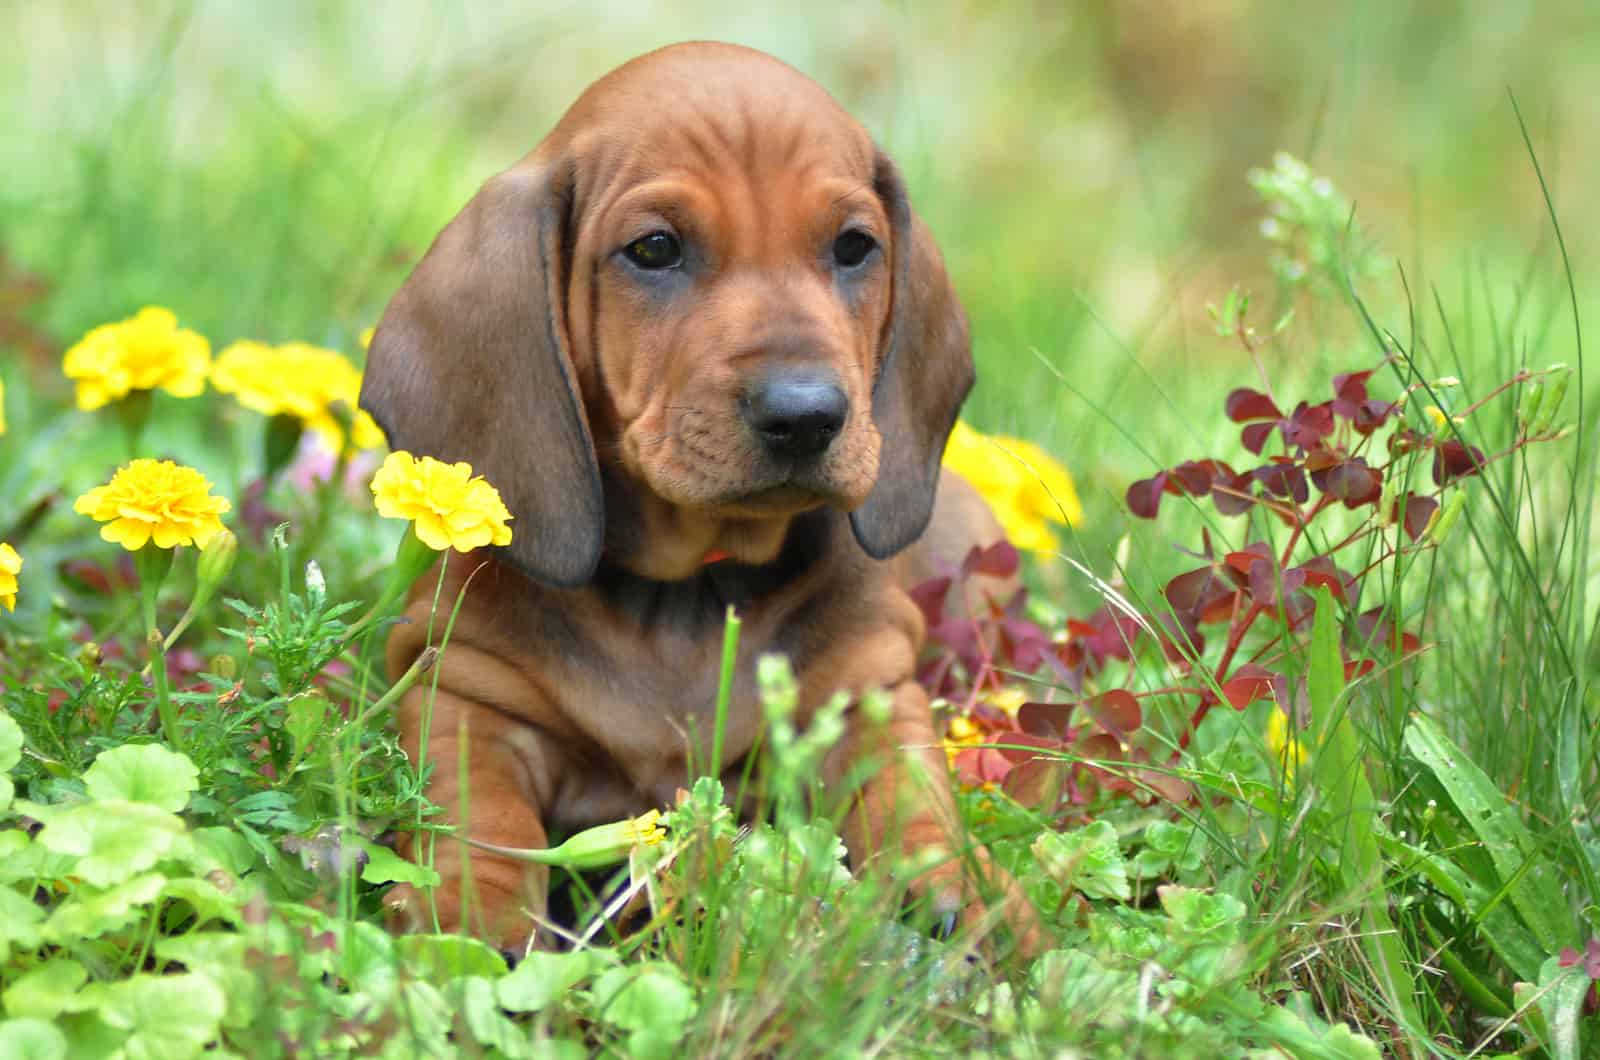 the adorable brown dachshund lies in the grass and rests